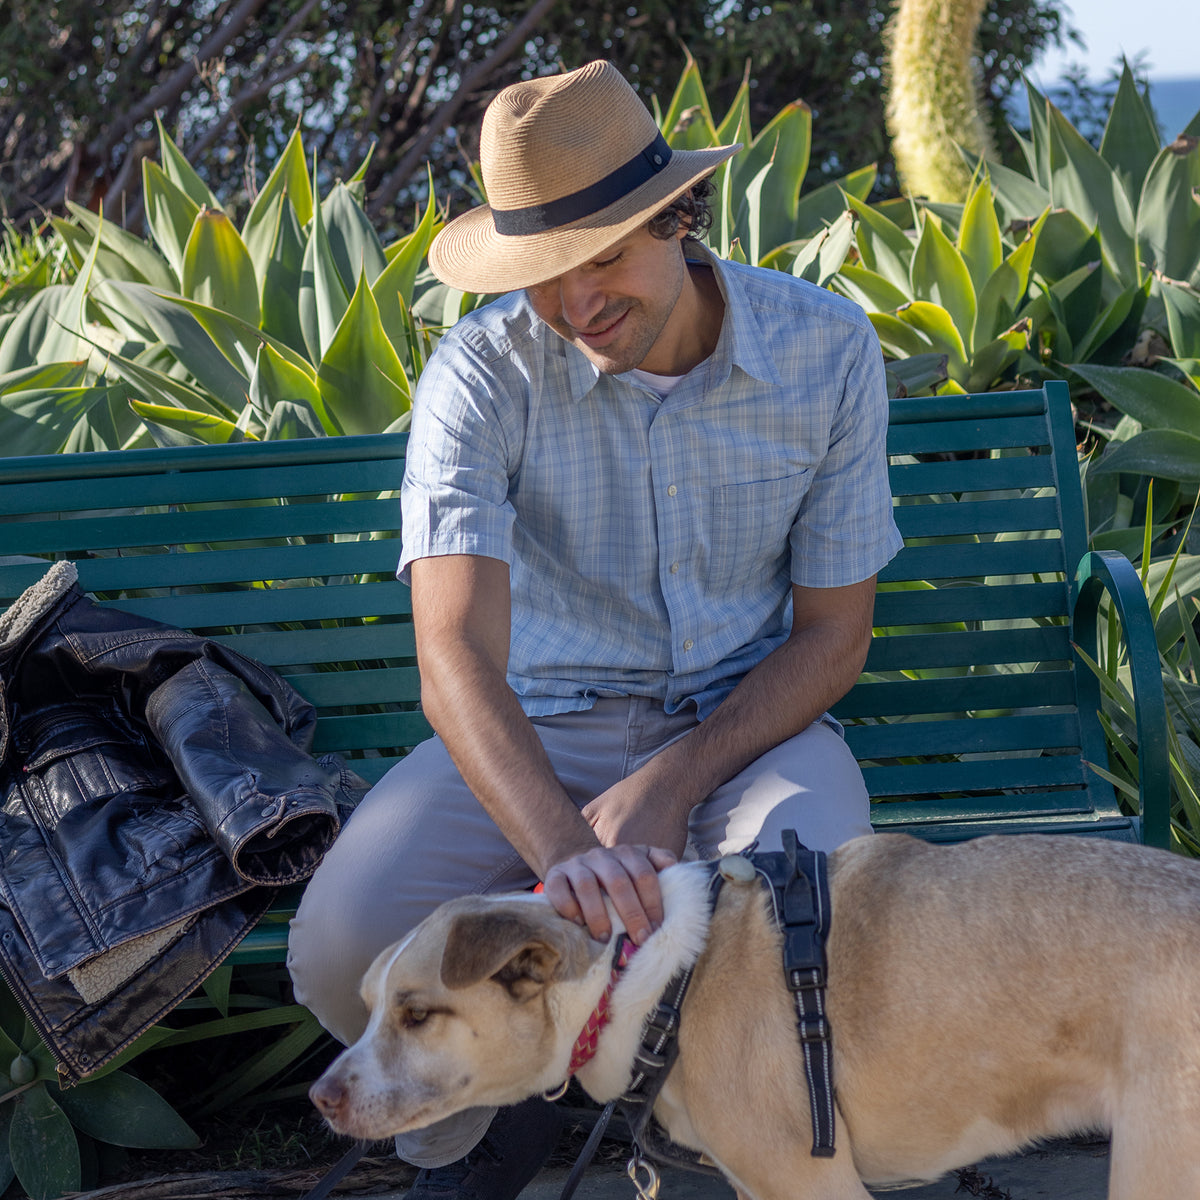 Men's Havana Hat by Sunday Afternoons | Clothing Accessories at West Marine